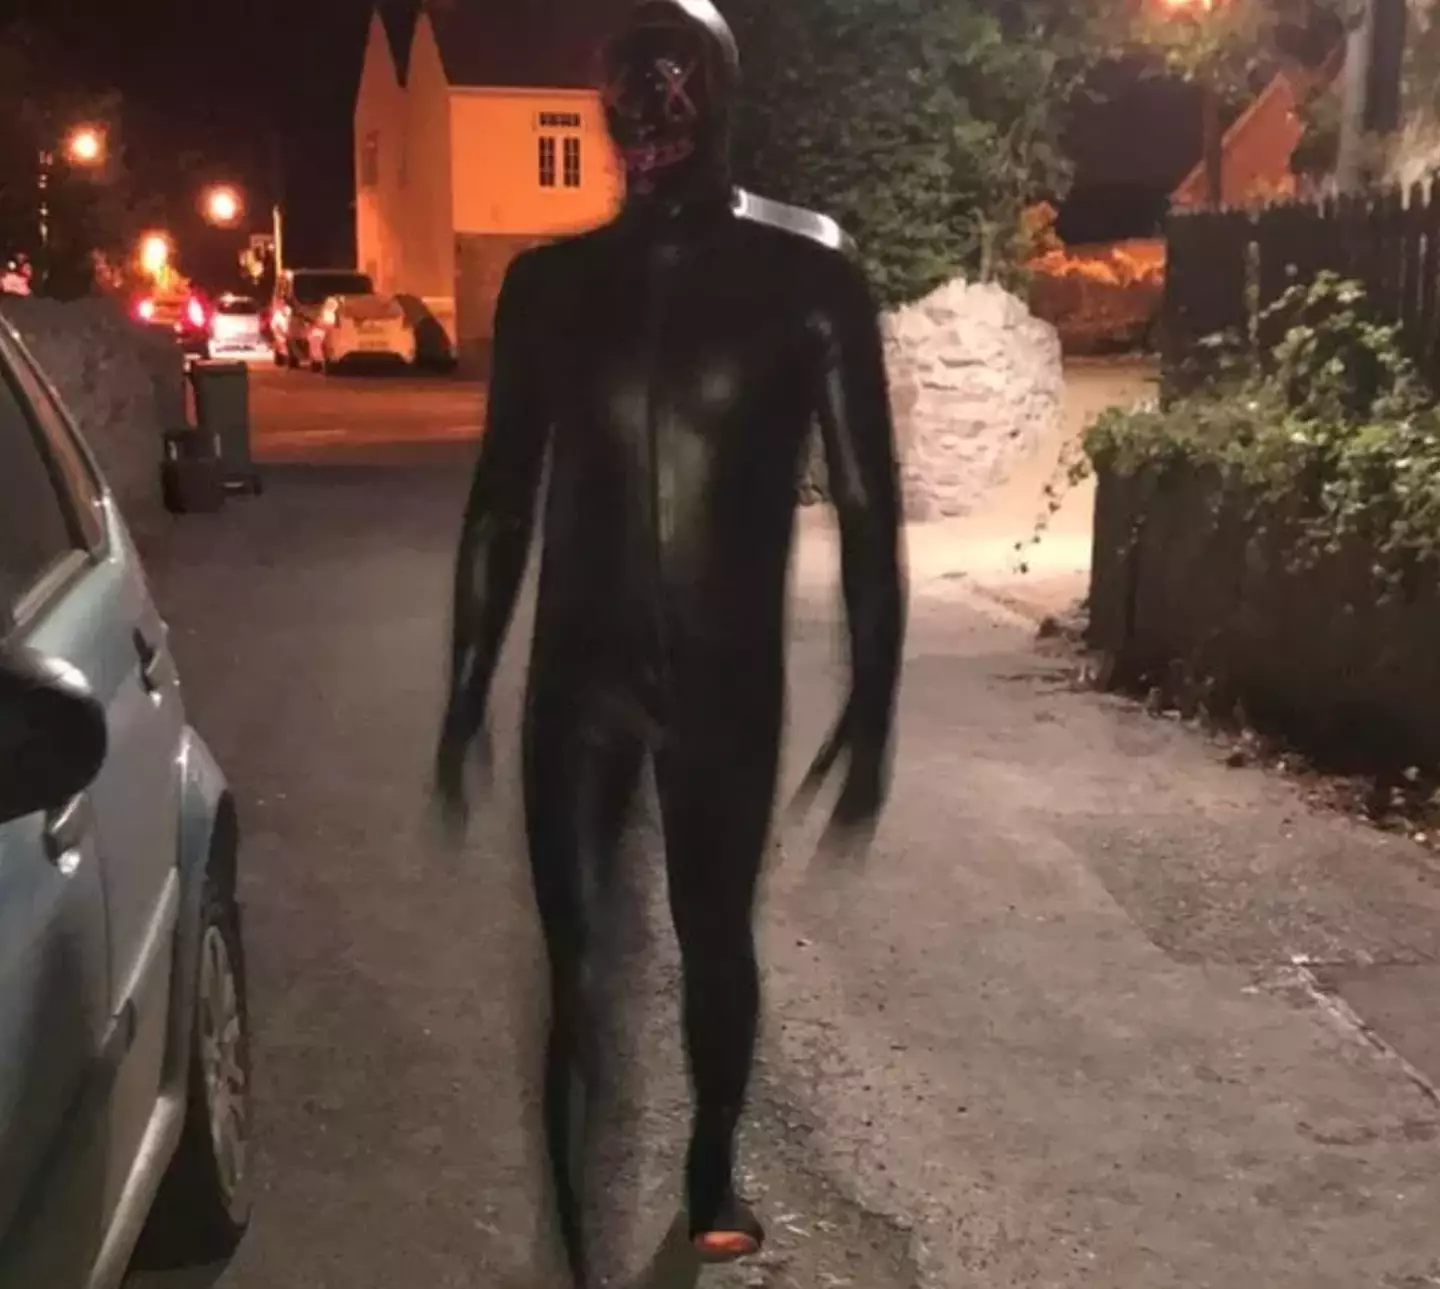 The creepy suit has caused concern in the area.